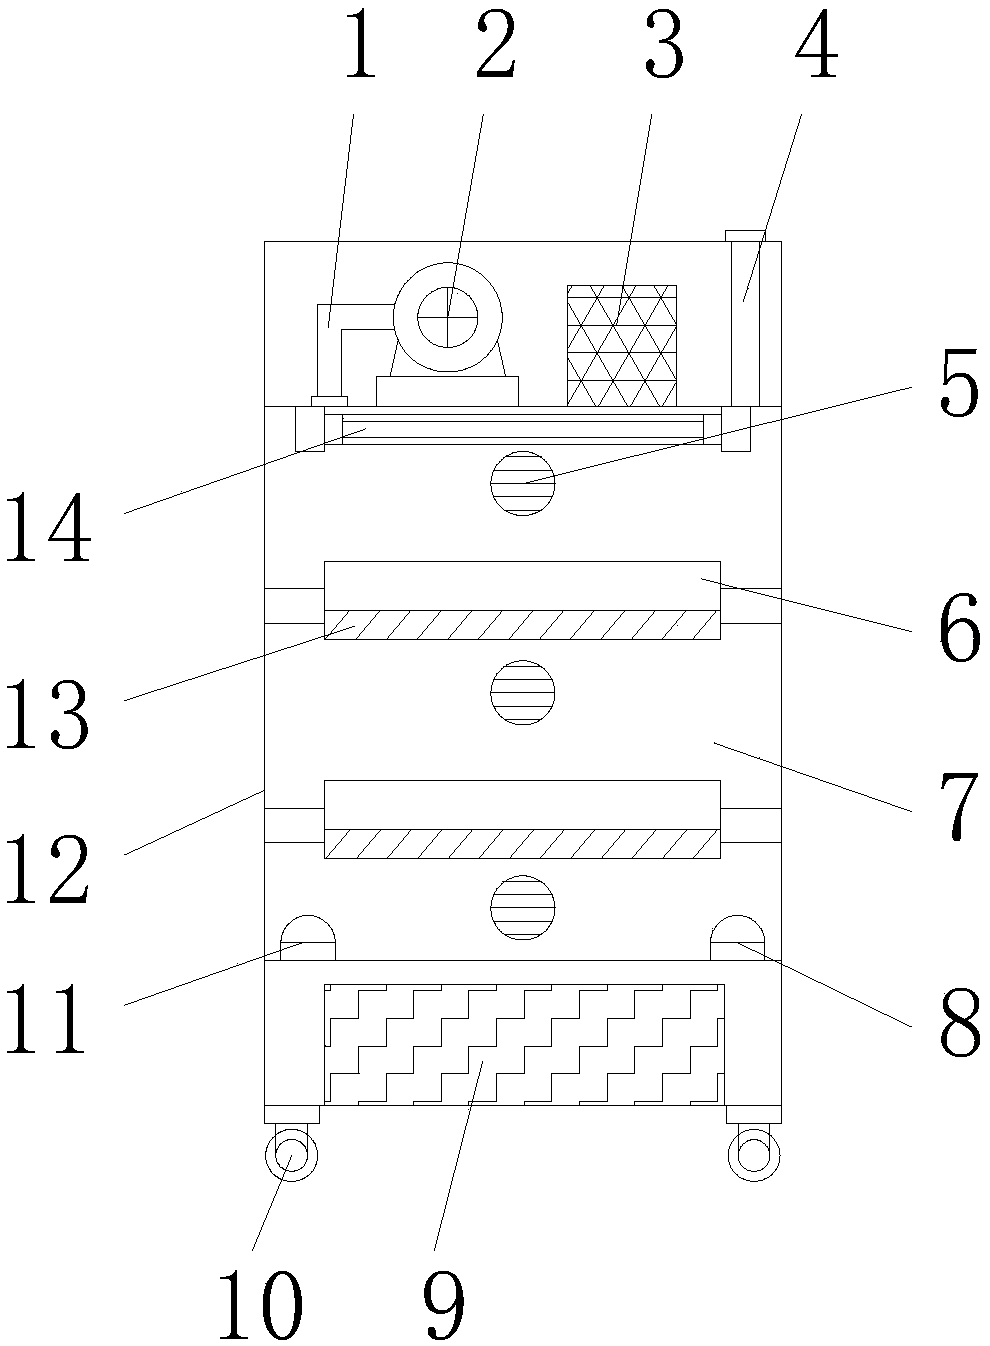 Storage device with metering function for storing seeds